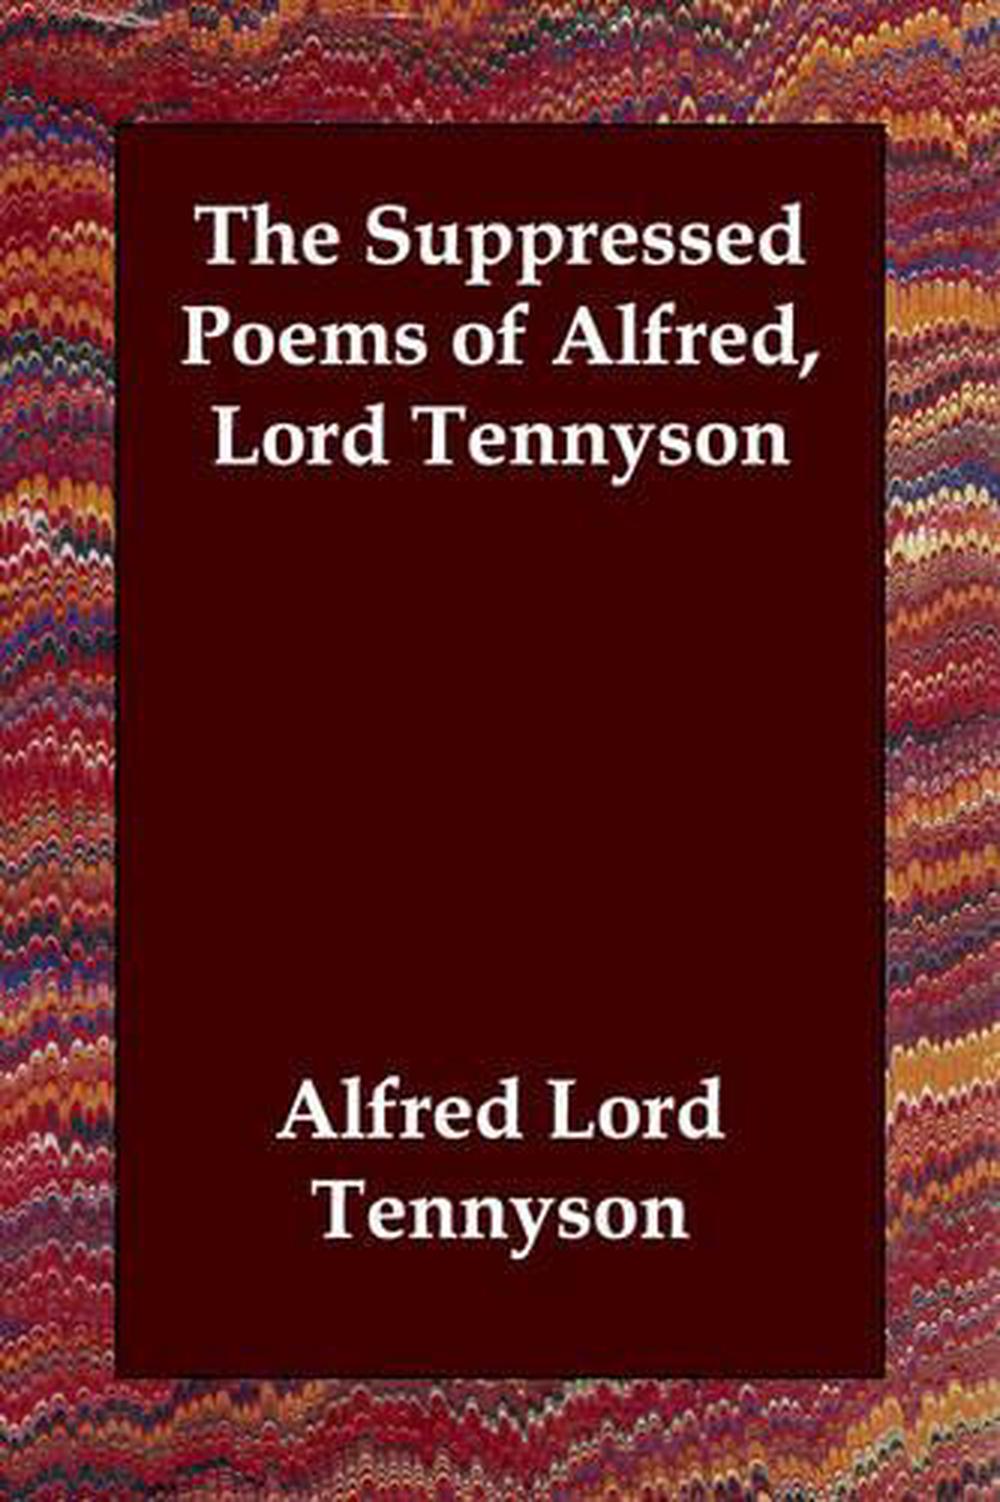 The Suppressed Poems of Alfred, Lord Tennyson by Alfred Tennyson ...